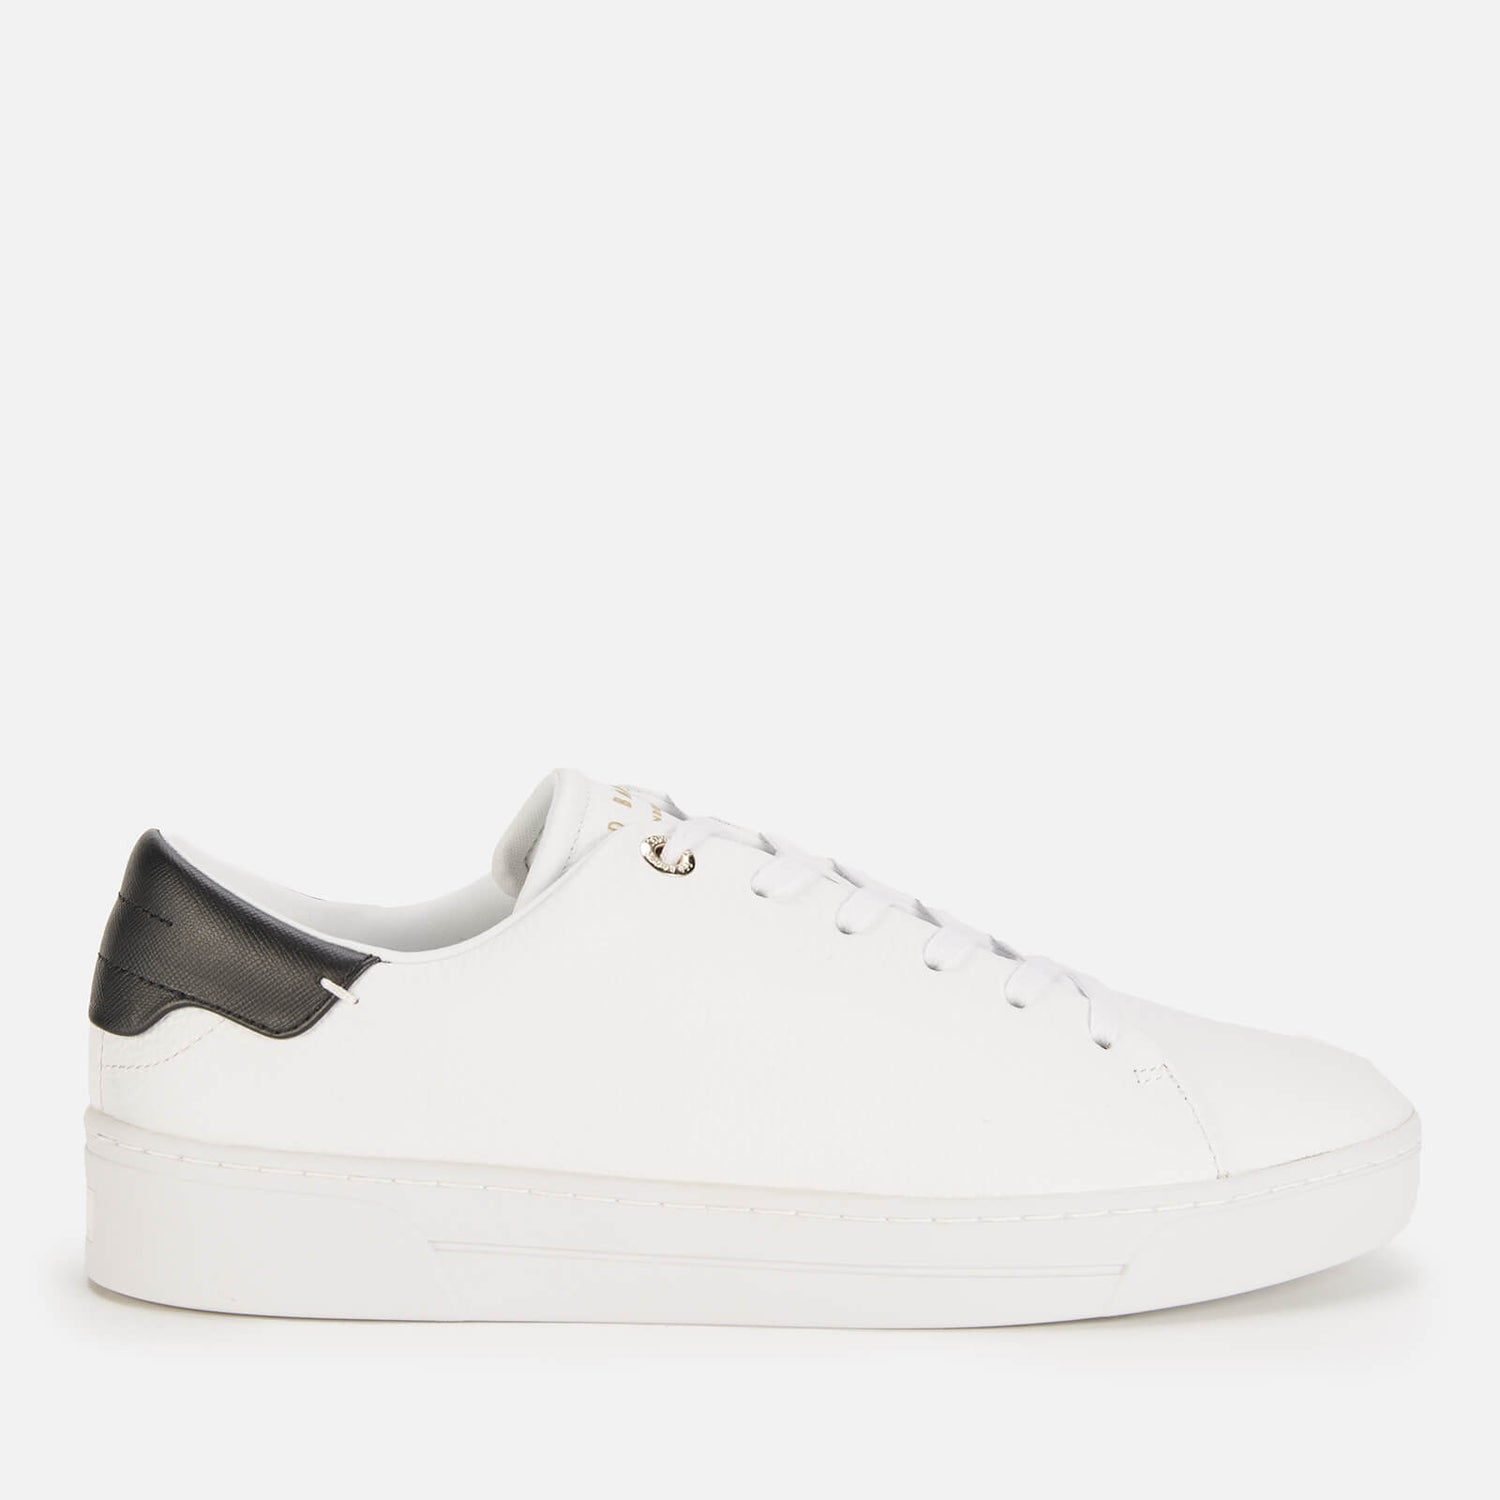 Ted Baker Women's Kimmii Leather Cupsole Trainers - White/Black